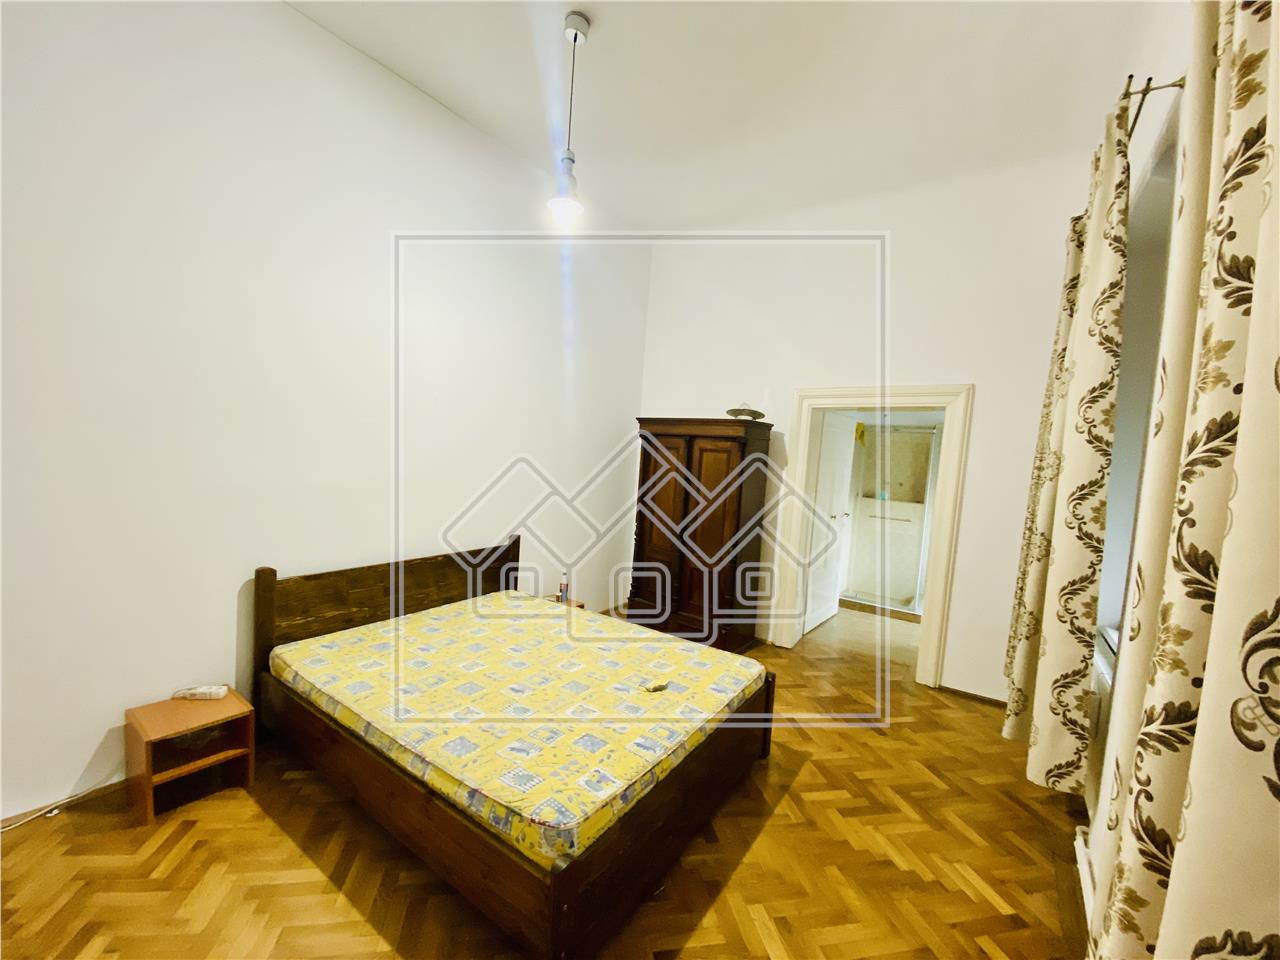 Apartment for sale in Sibiu - 141 square meters - 4 rooms and 2 bathro